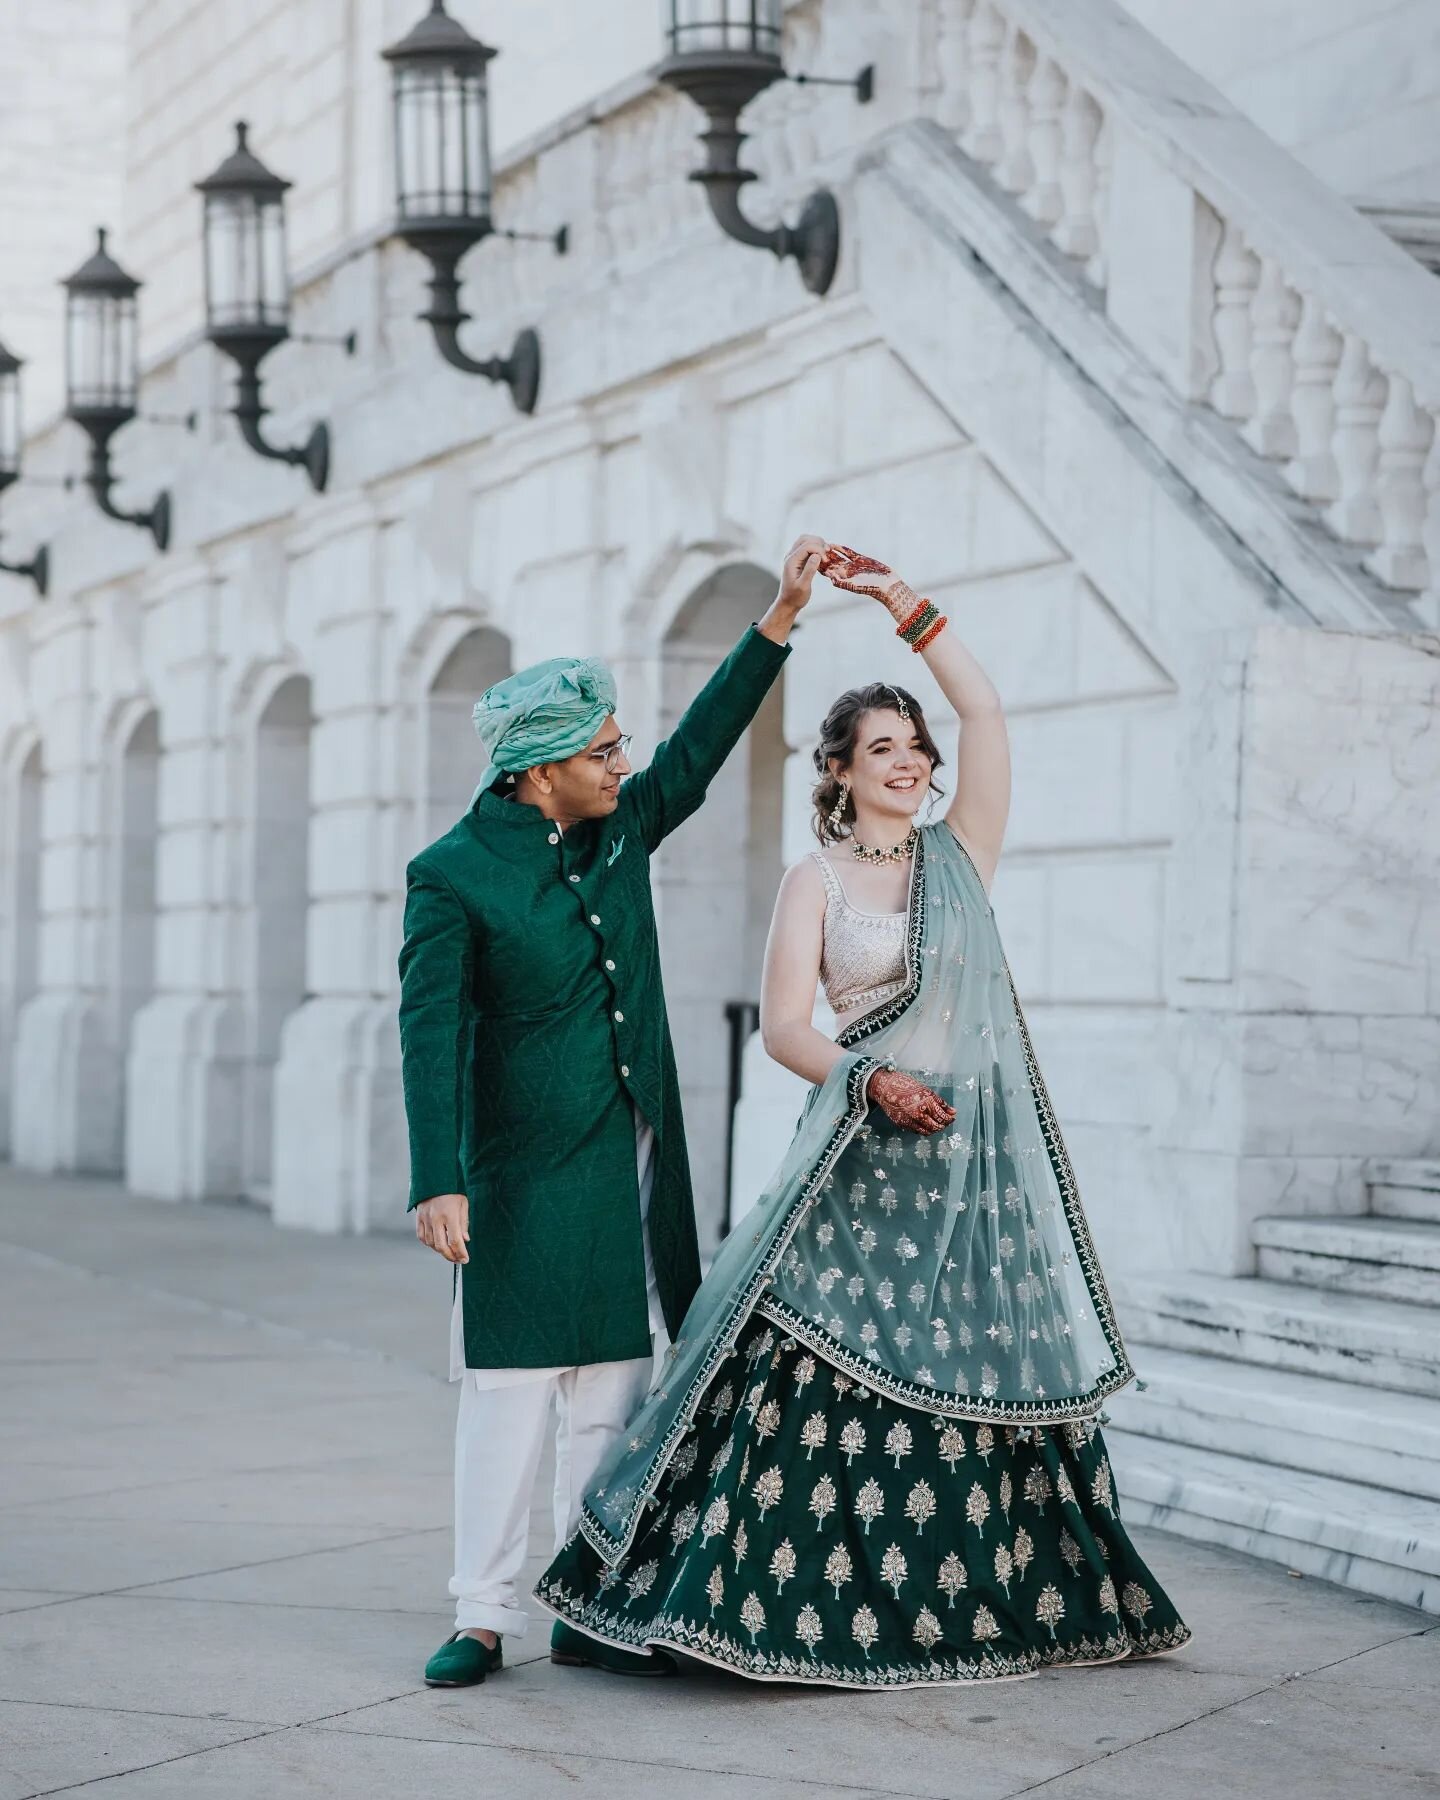 This gorgeous Indian-American wedding was already a year ago! I have so many beautiful images from this wedding that I've yet to share. Stay tuned!
.
.
.
.
.
.

#weddingphotography #weddingphotographer #weddingphotos #weddingphoto #weddingday #weddin